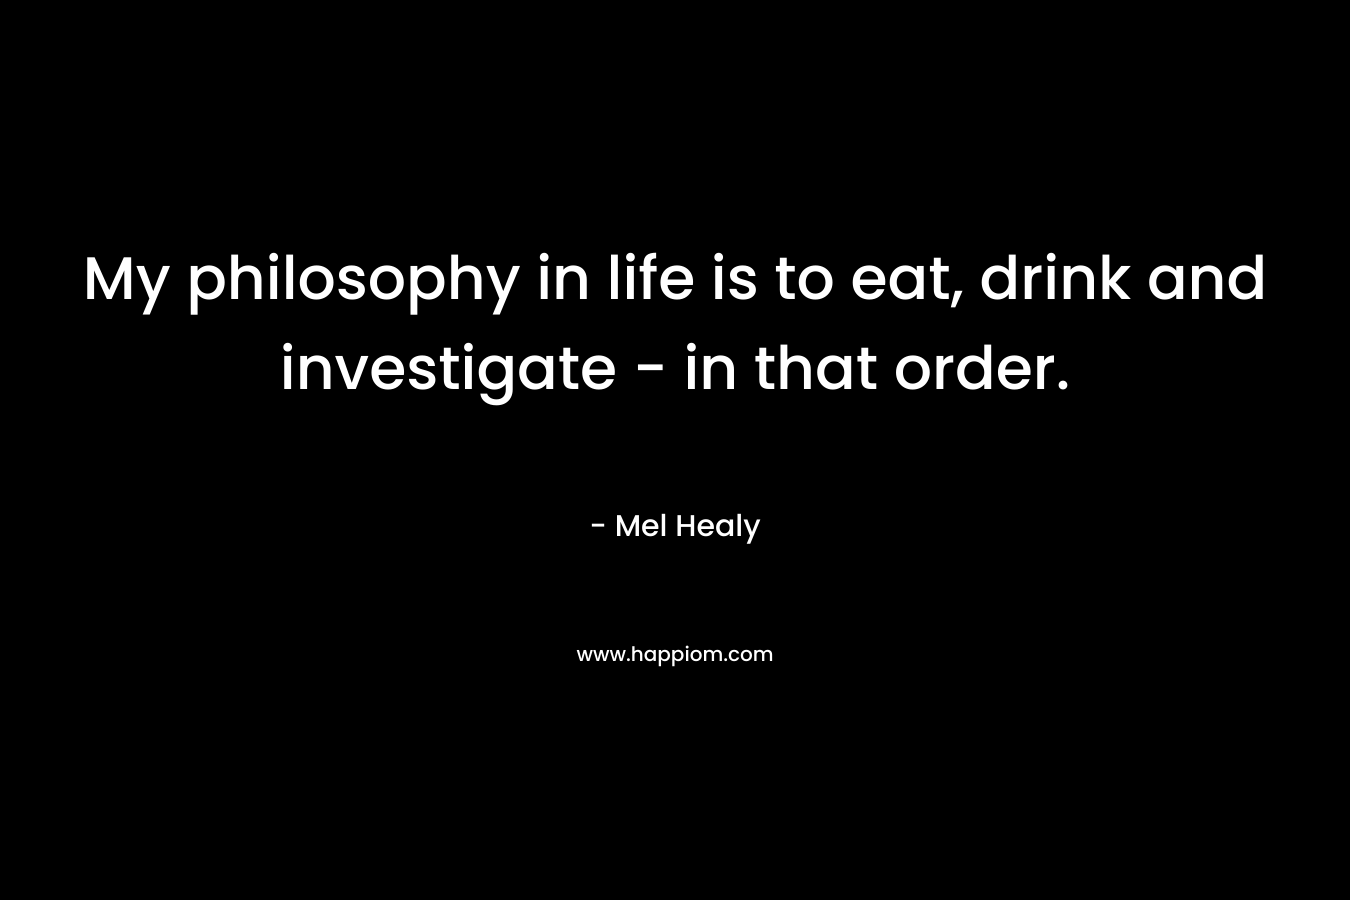 My philosophy in life is to eat, drink and investigate - in that order.